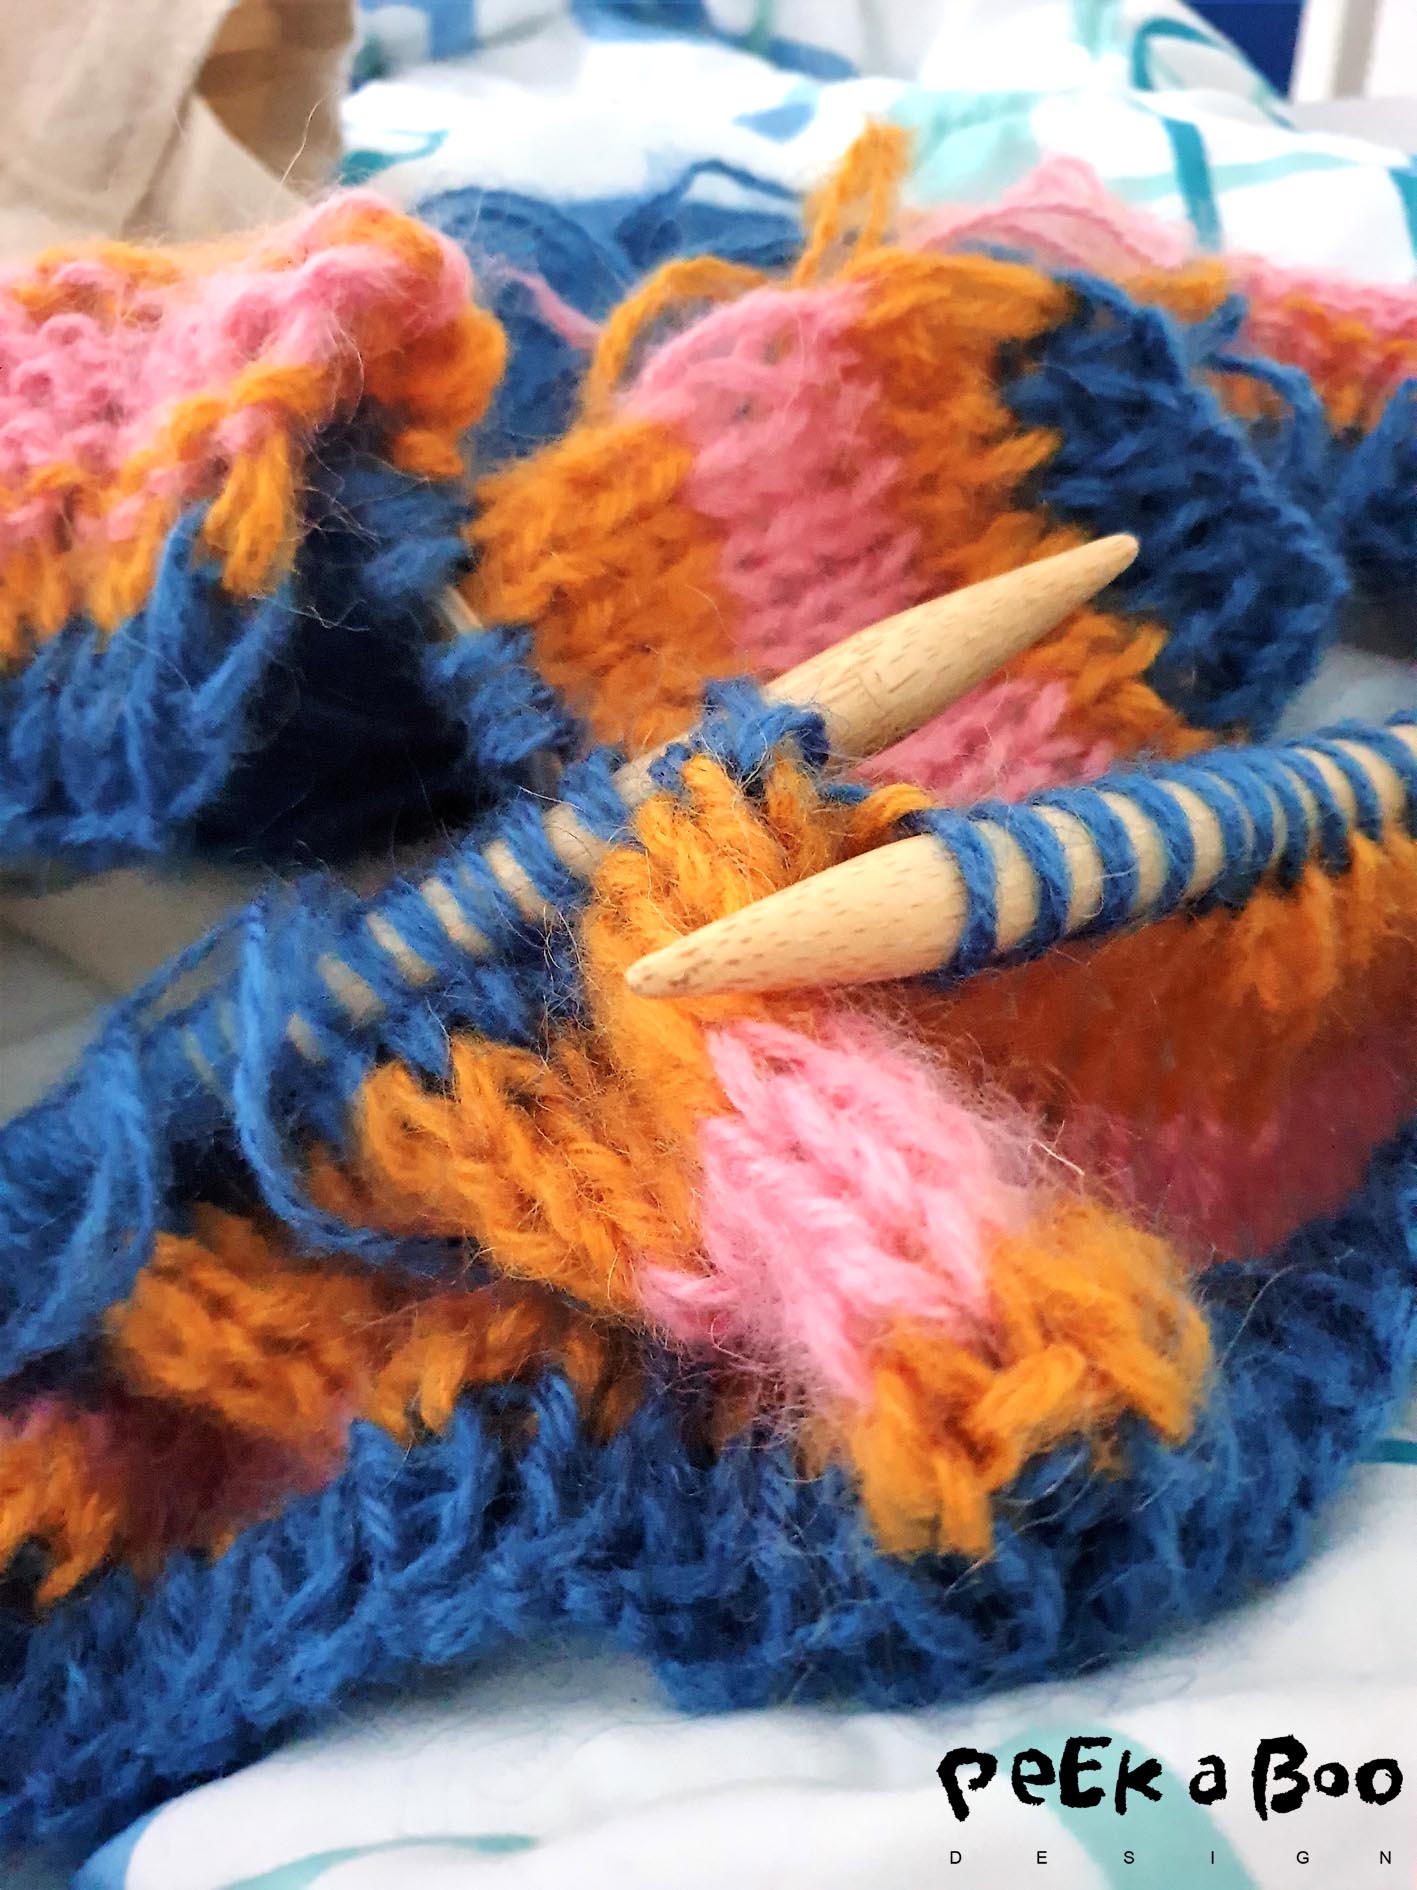 I started knitting the rib on knitting needles size 10 and changed to size 12 when knitting plain knit. 